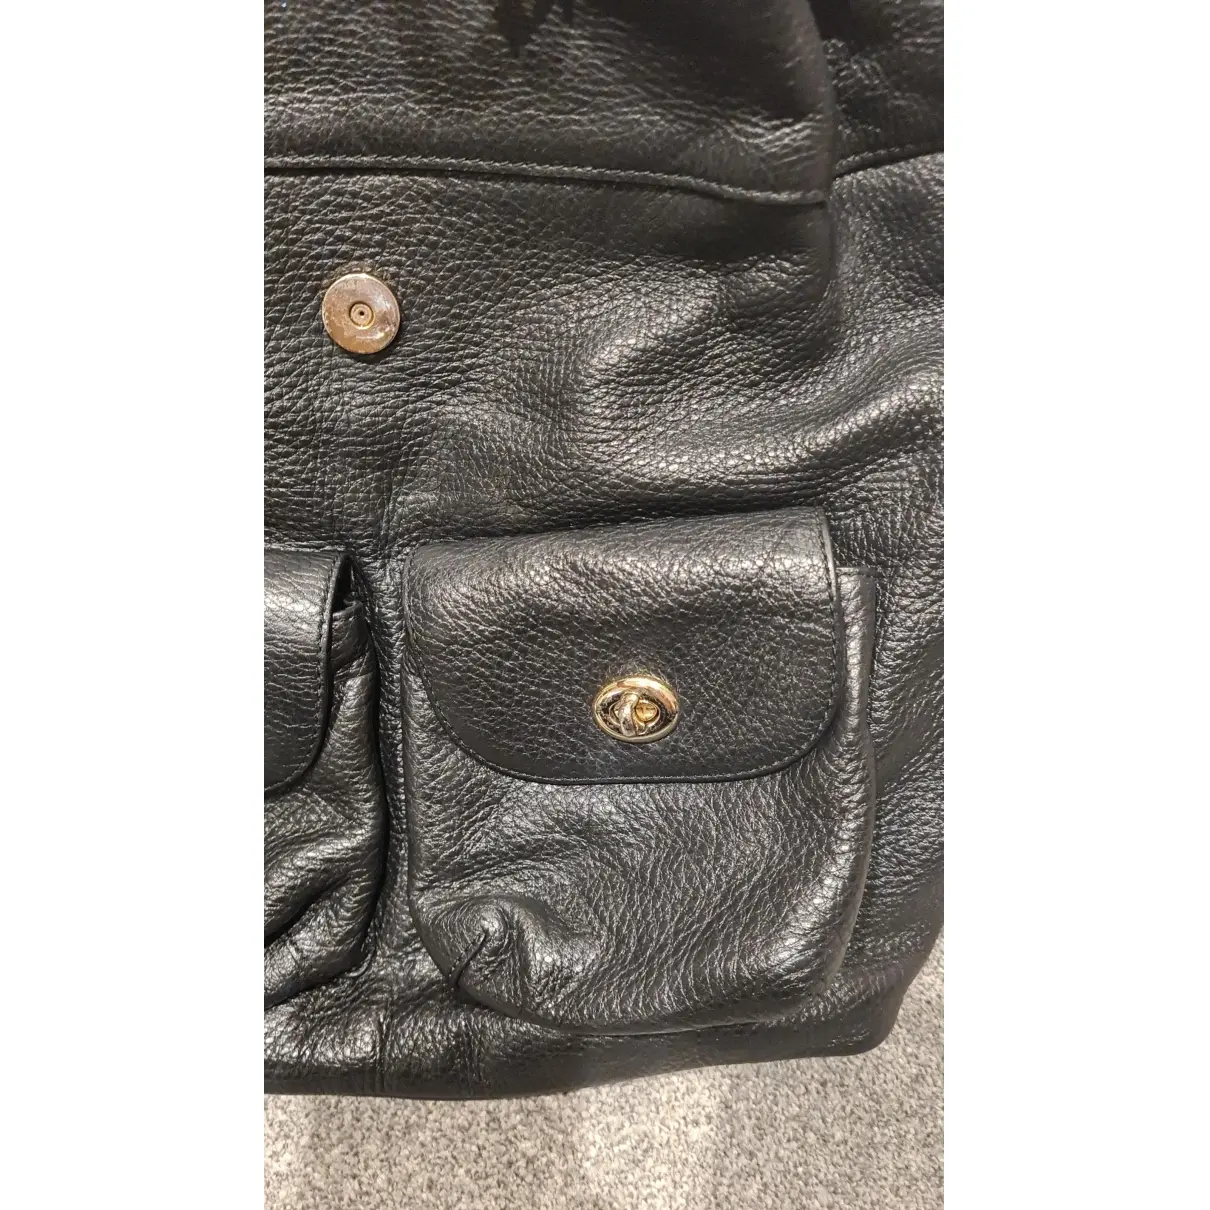 Leather backpack Coach